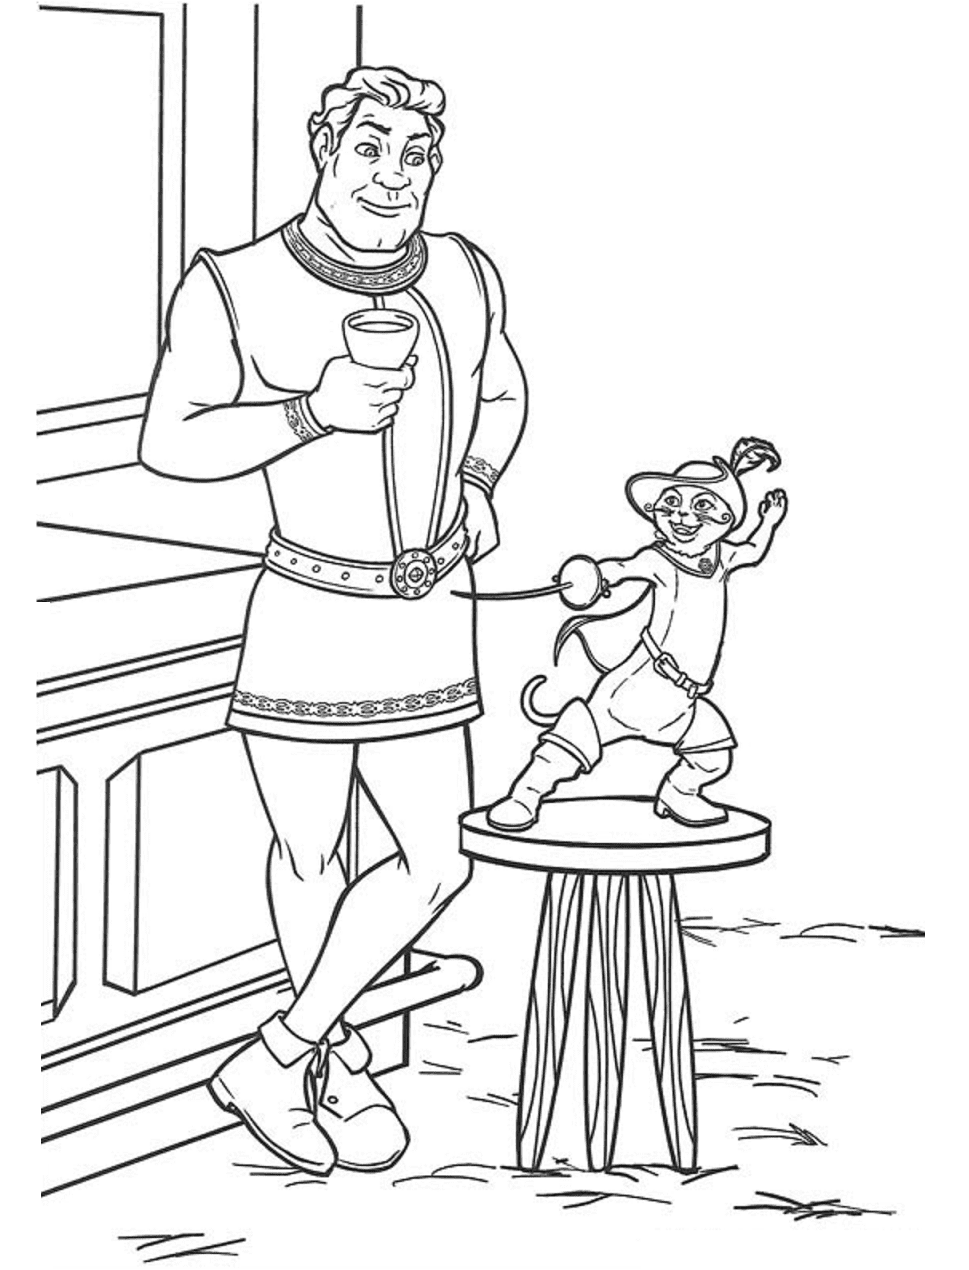 Shrek With Puss In Boots Coloring Pages